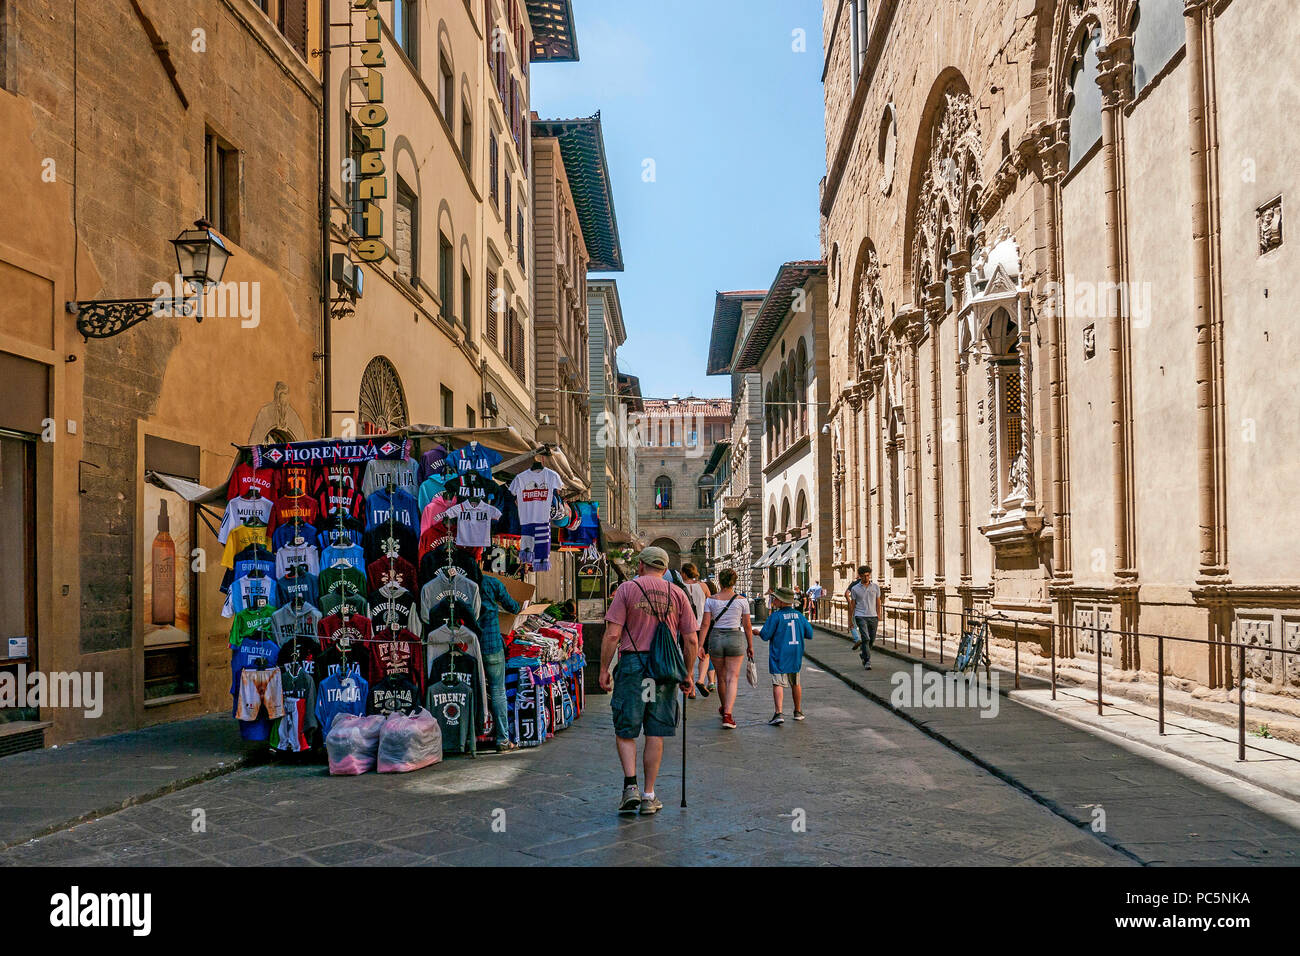 People looking at market stalls in a medieval street in Florence, Tuscany, Italy Stock Photo